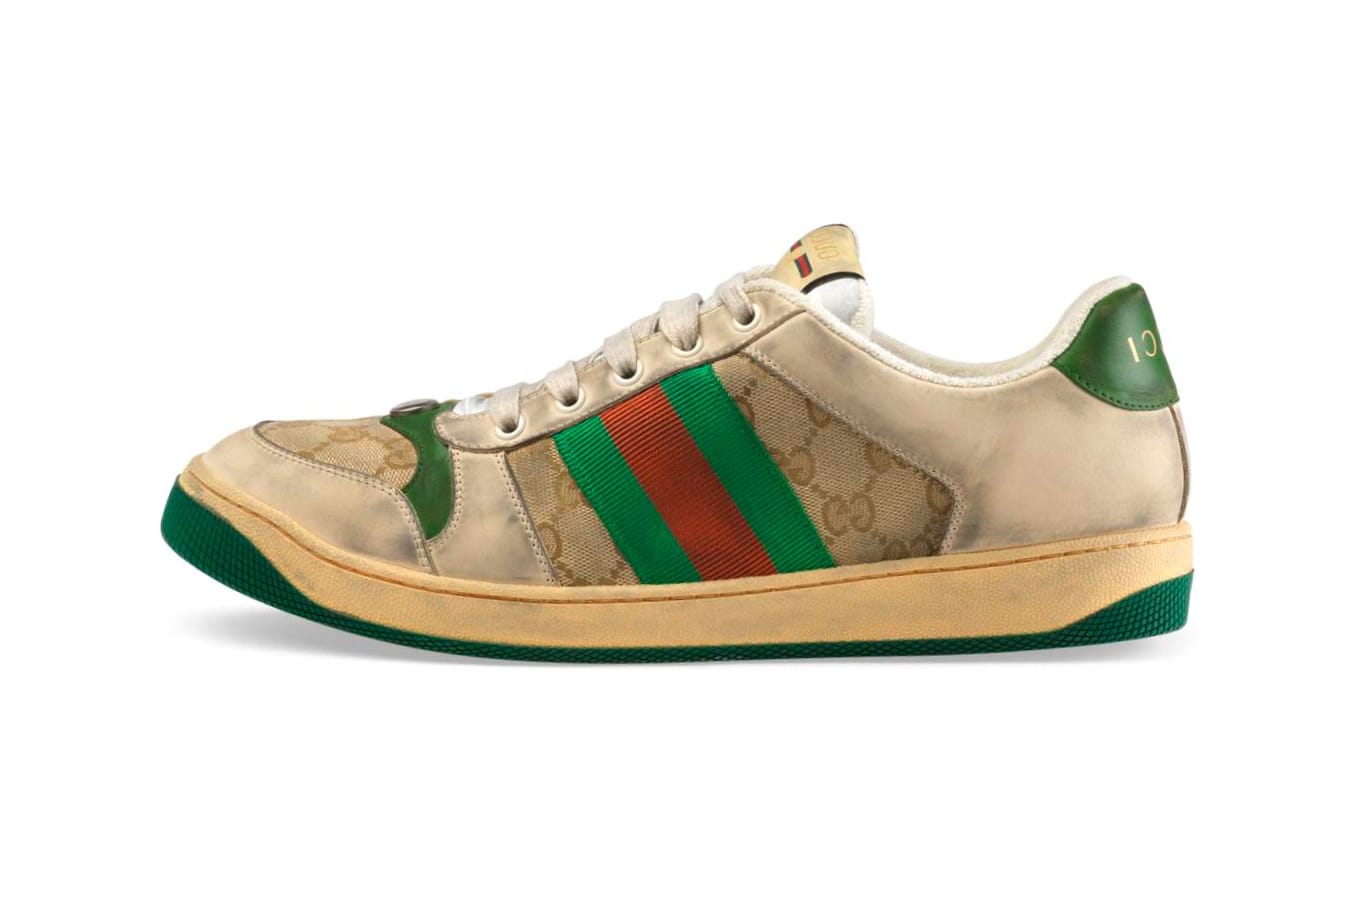 Gucci Black and Green Interlocking G Ace Sneakers Gucci